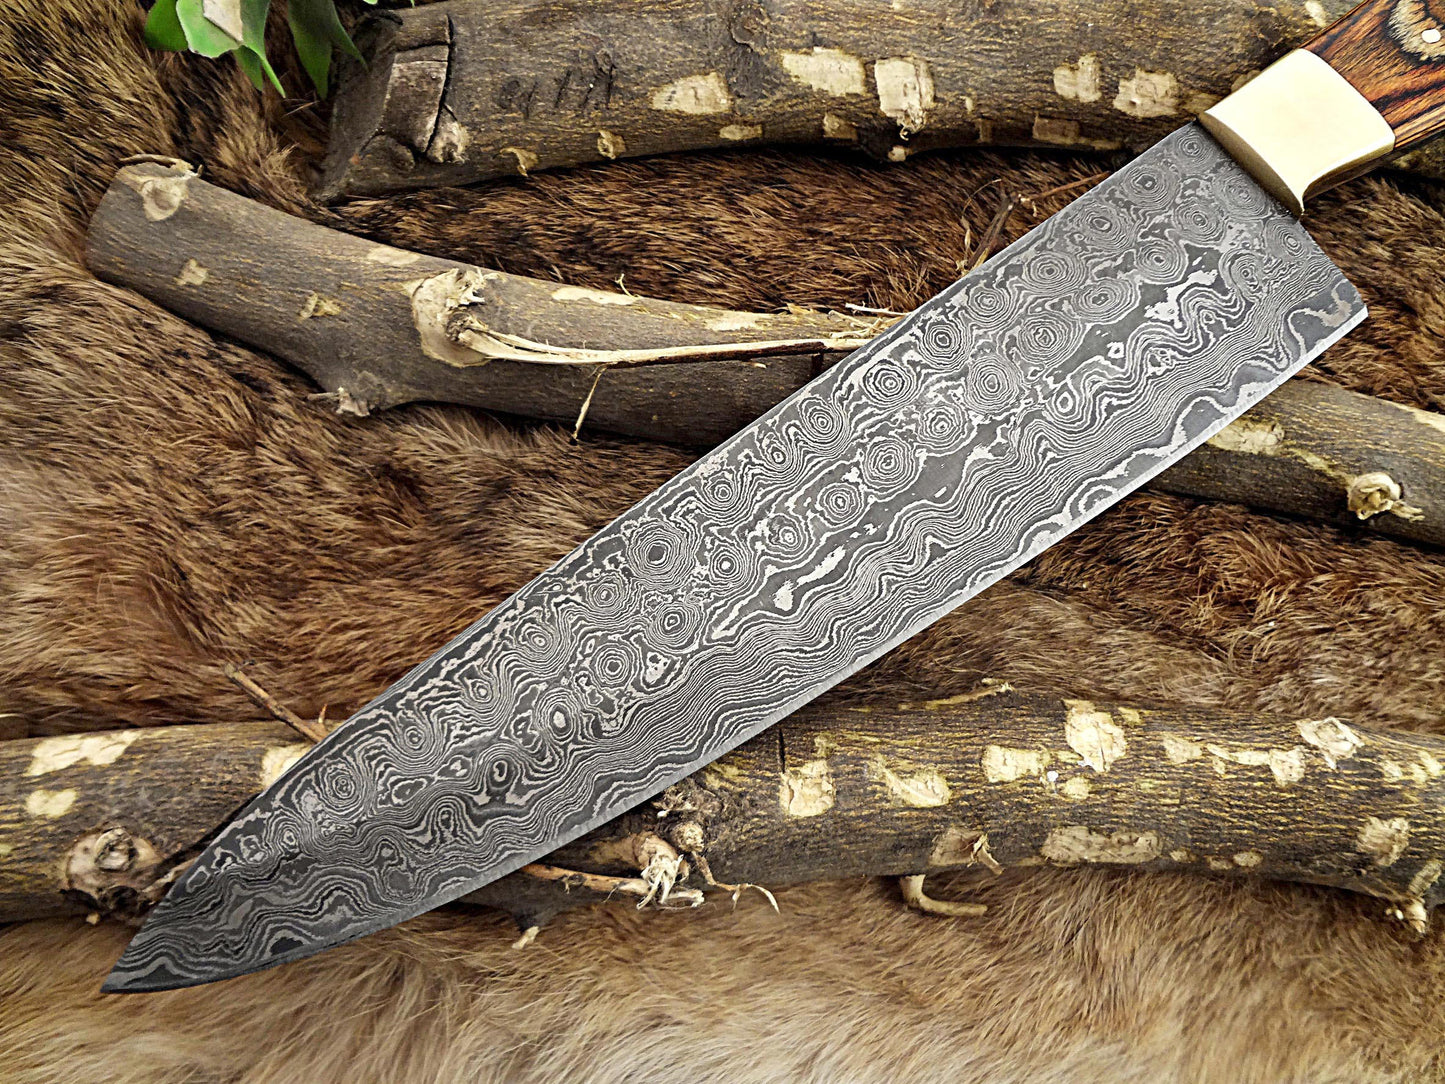 Damascus Steel kitchen Knife 13 Inches full tang 8.5" long Hand Forged blade, 2 Tone Dollar wood and brass bolster scale